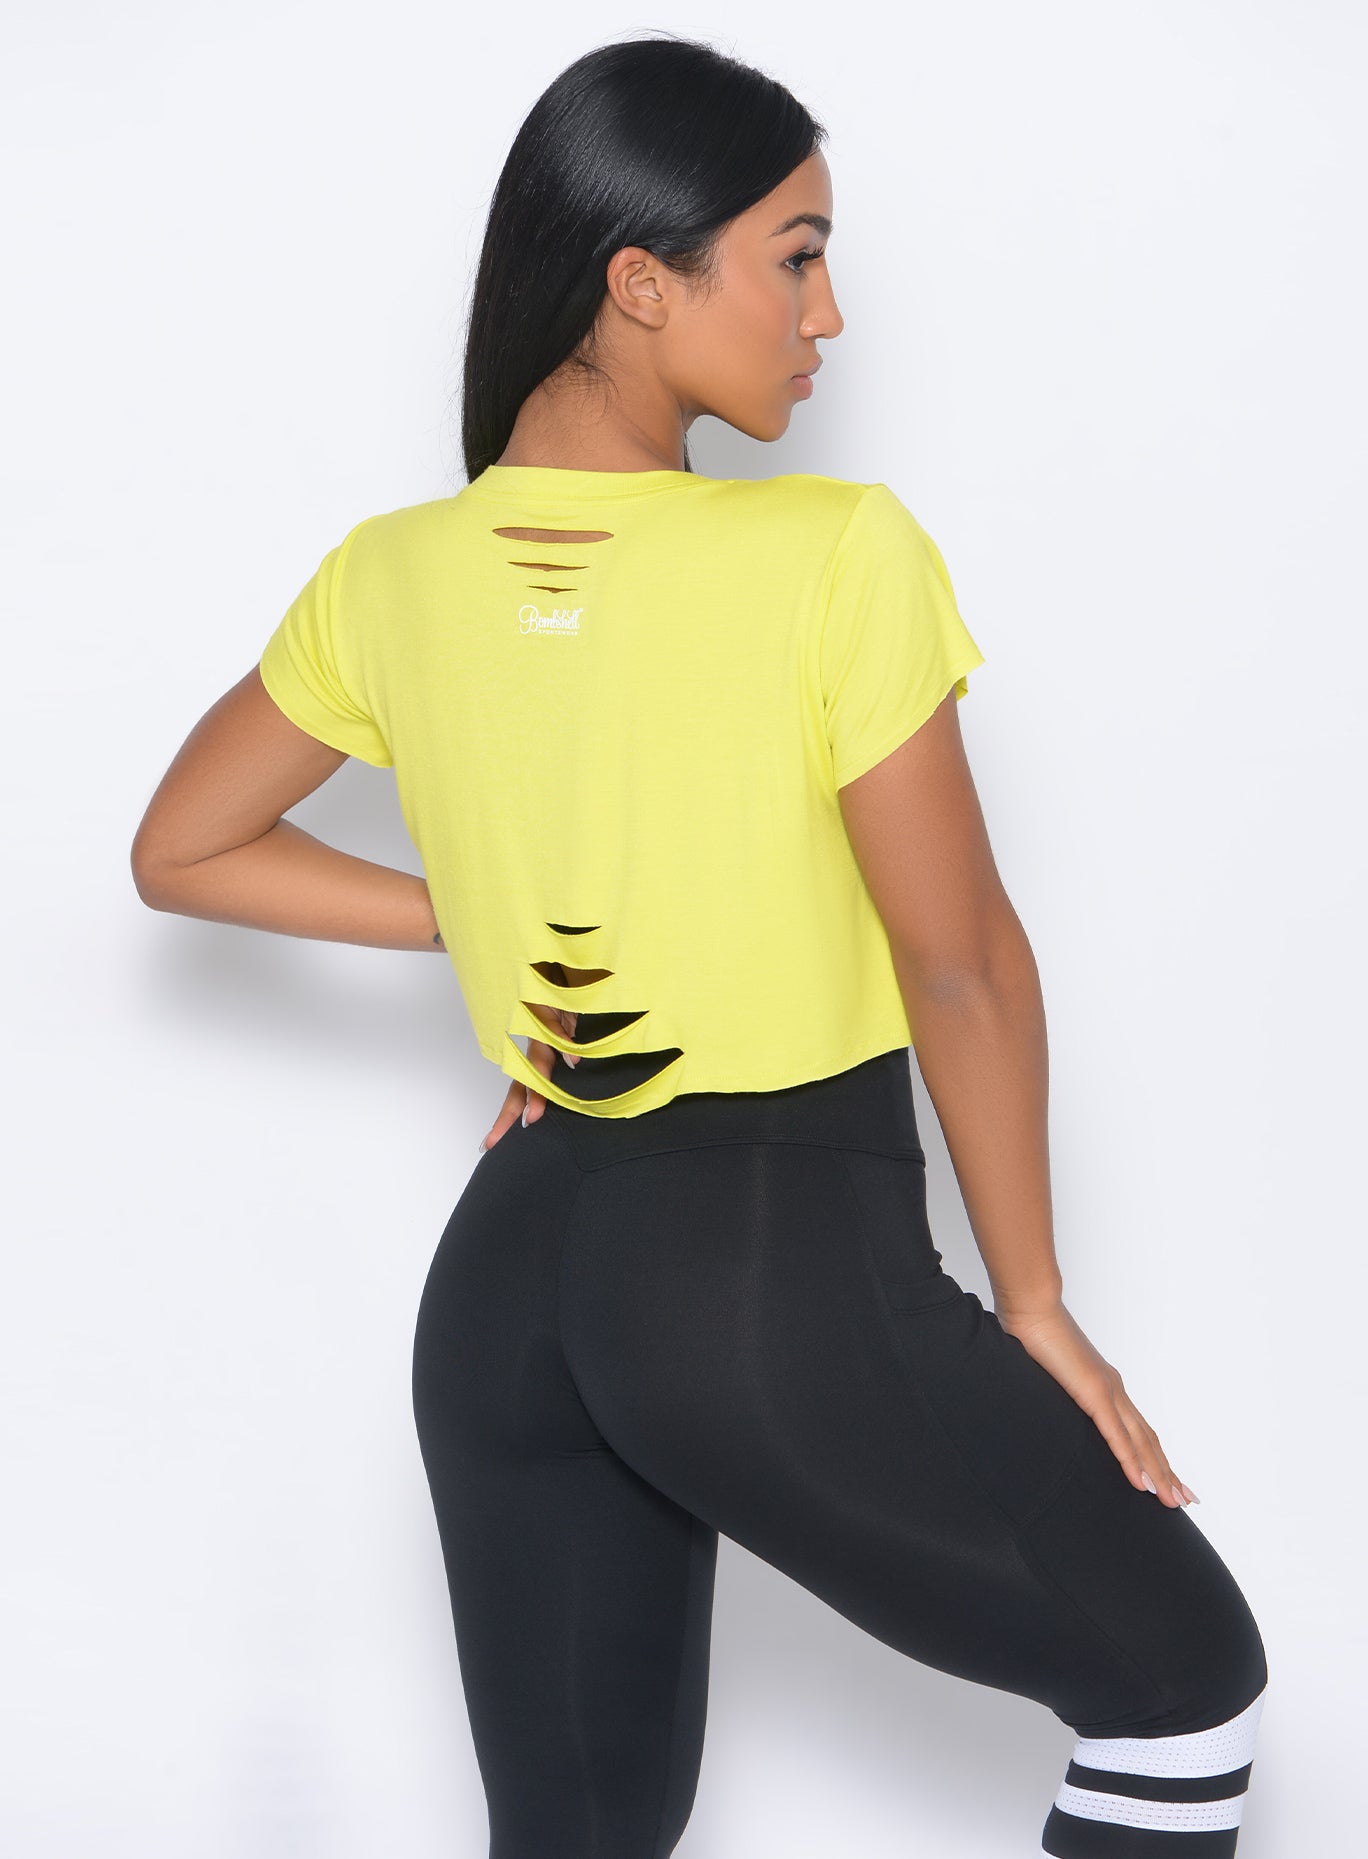 Back view of the model in our shredded tee in neon yellow and a black leggings